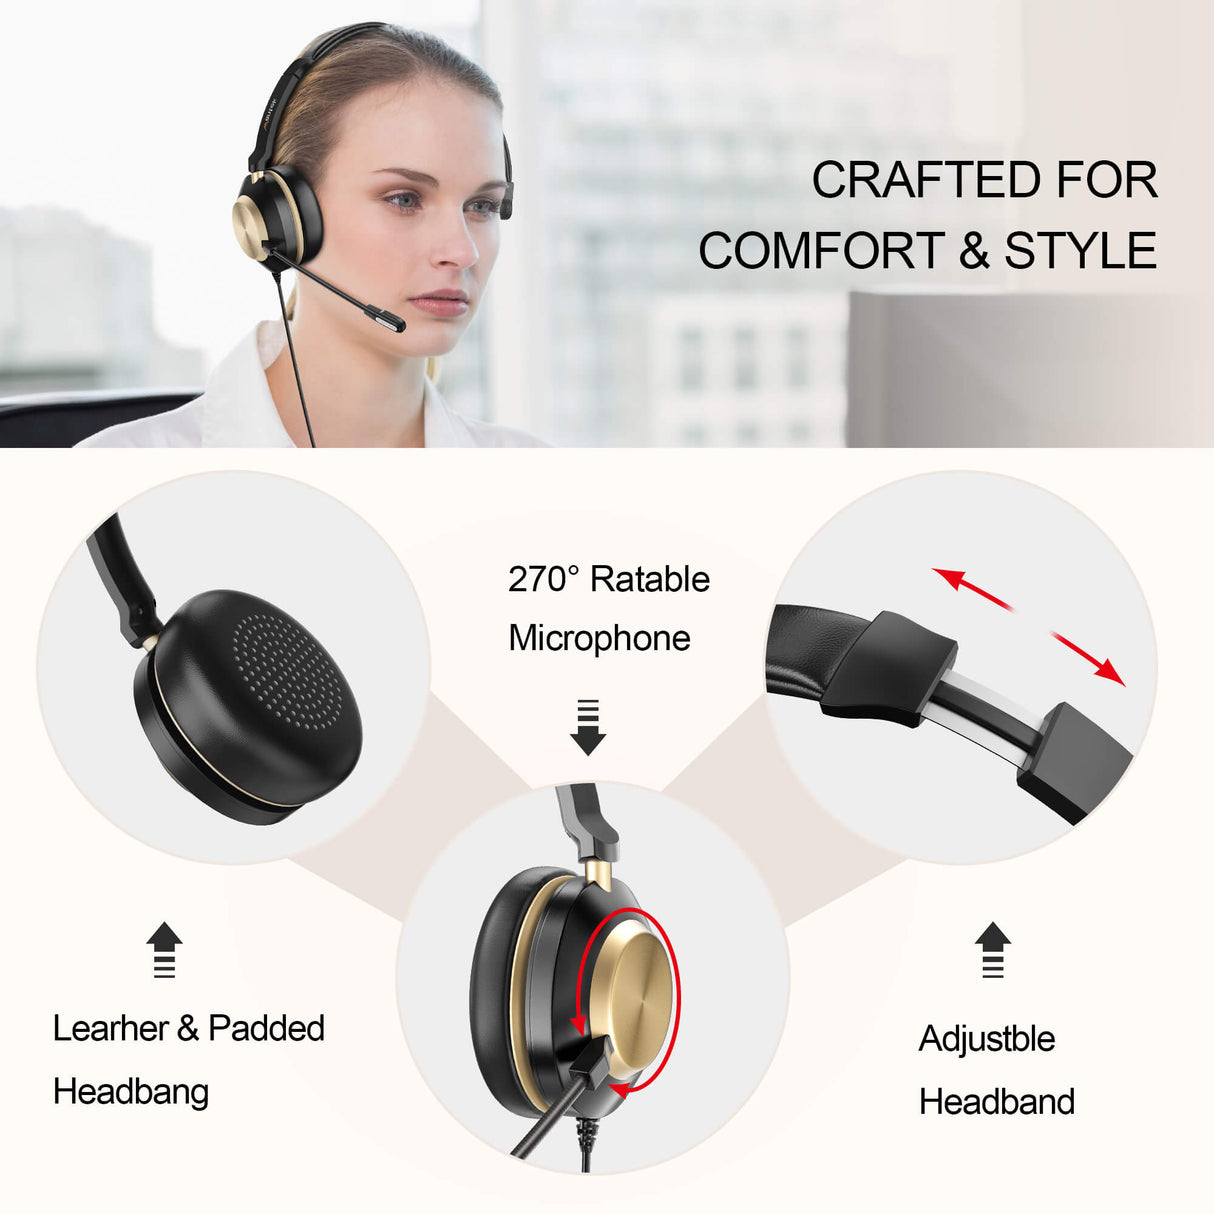 Wantek® h882 stereo 3-in-1 USB headset for Phones/Laptop/PC - iwantekWantek® h882 stereo 3-in-1 USB headset for Phones/Laptop/PC